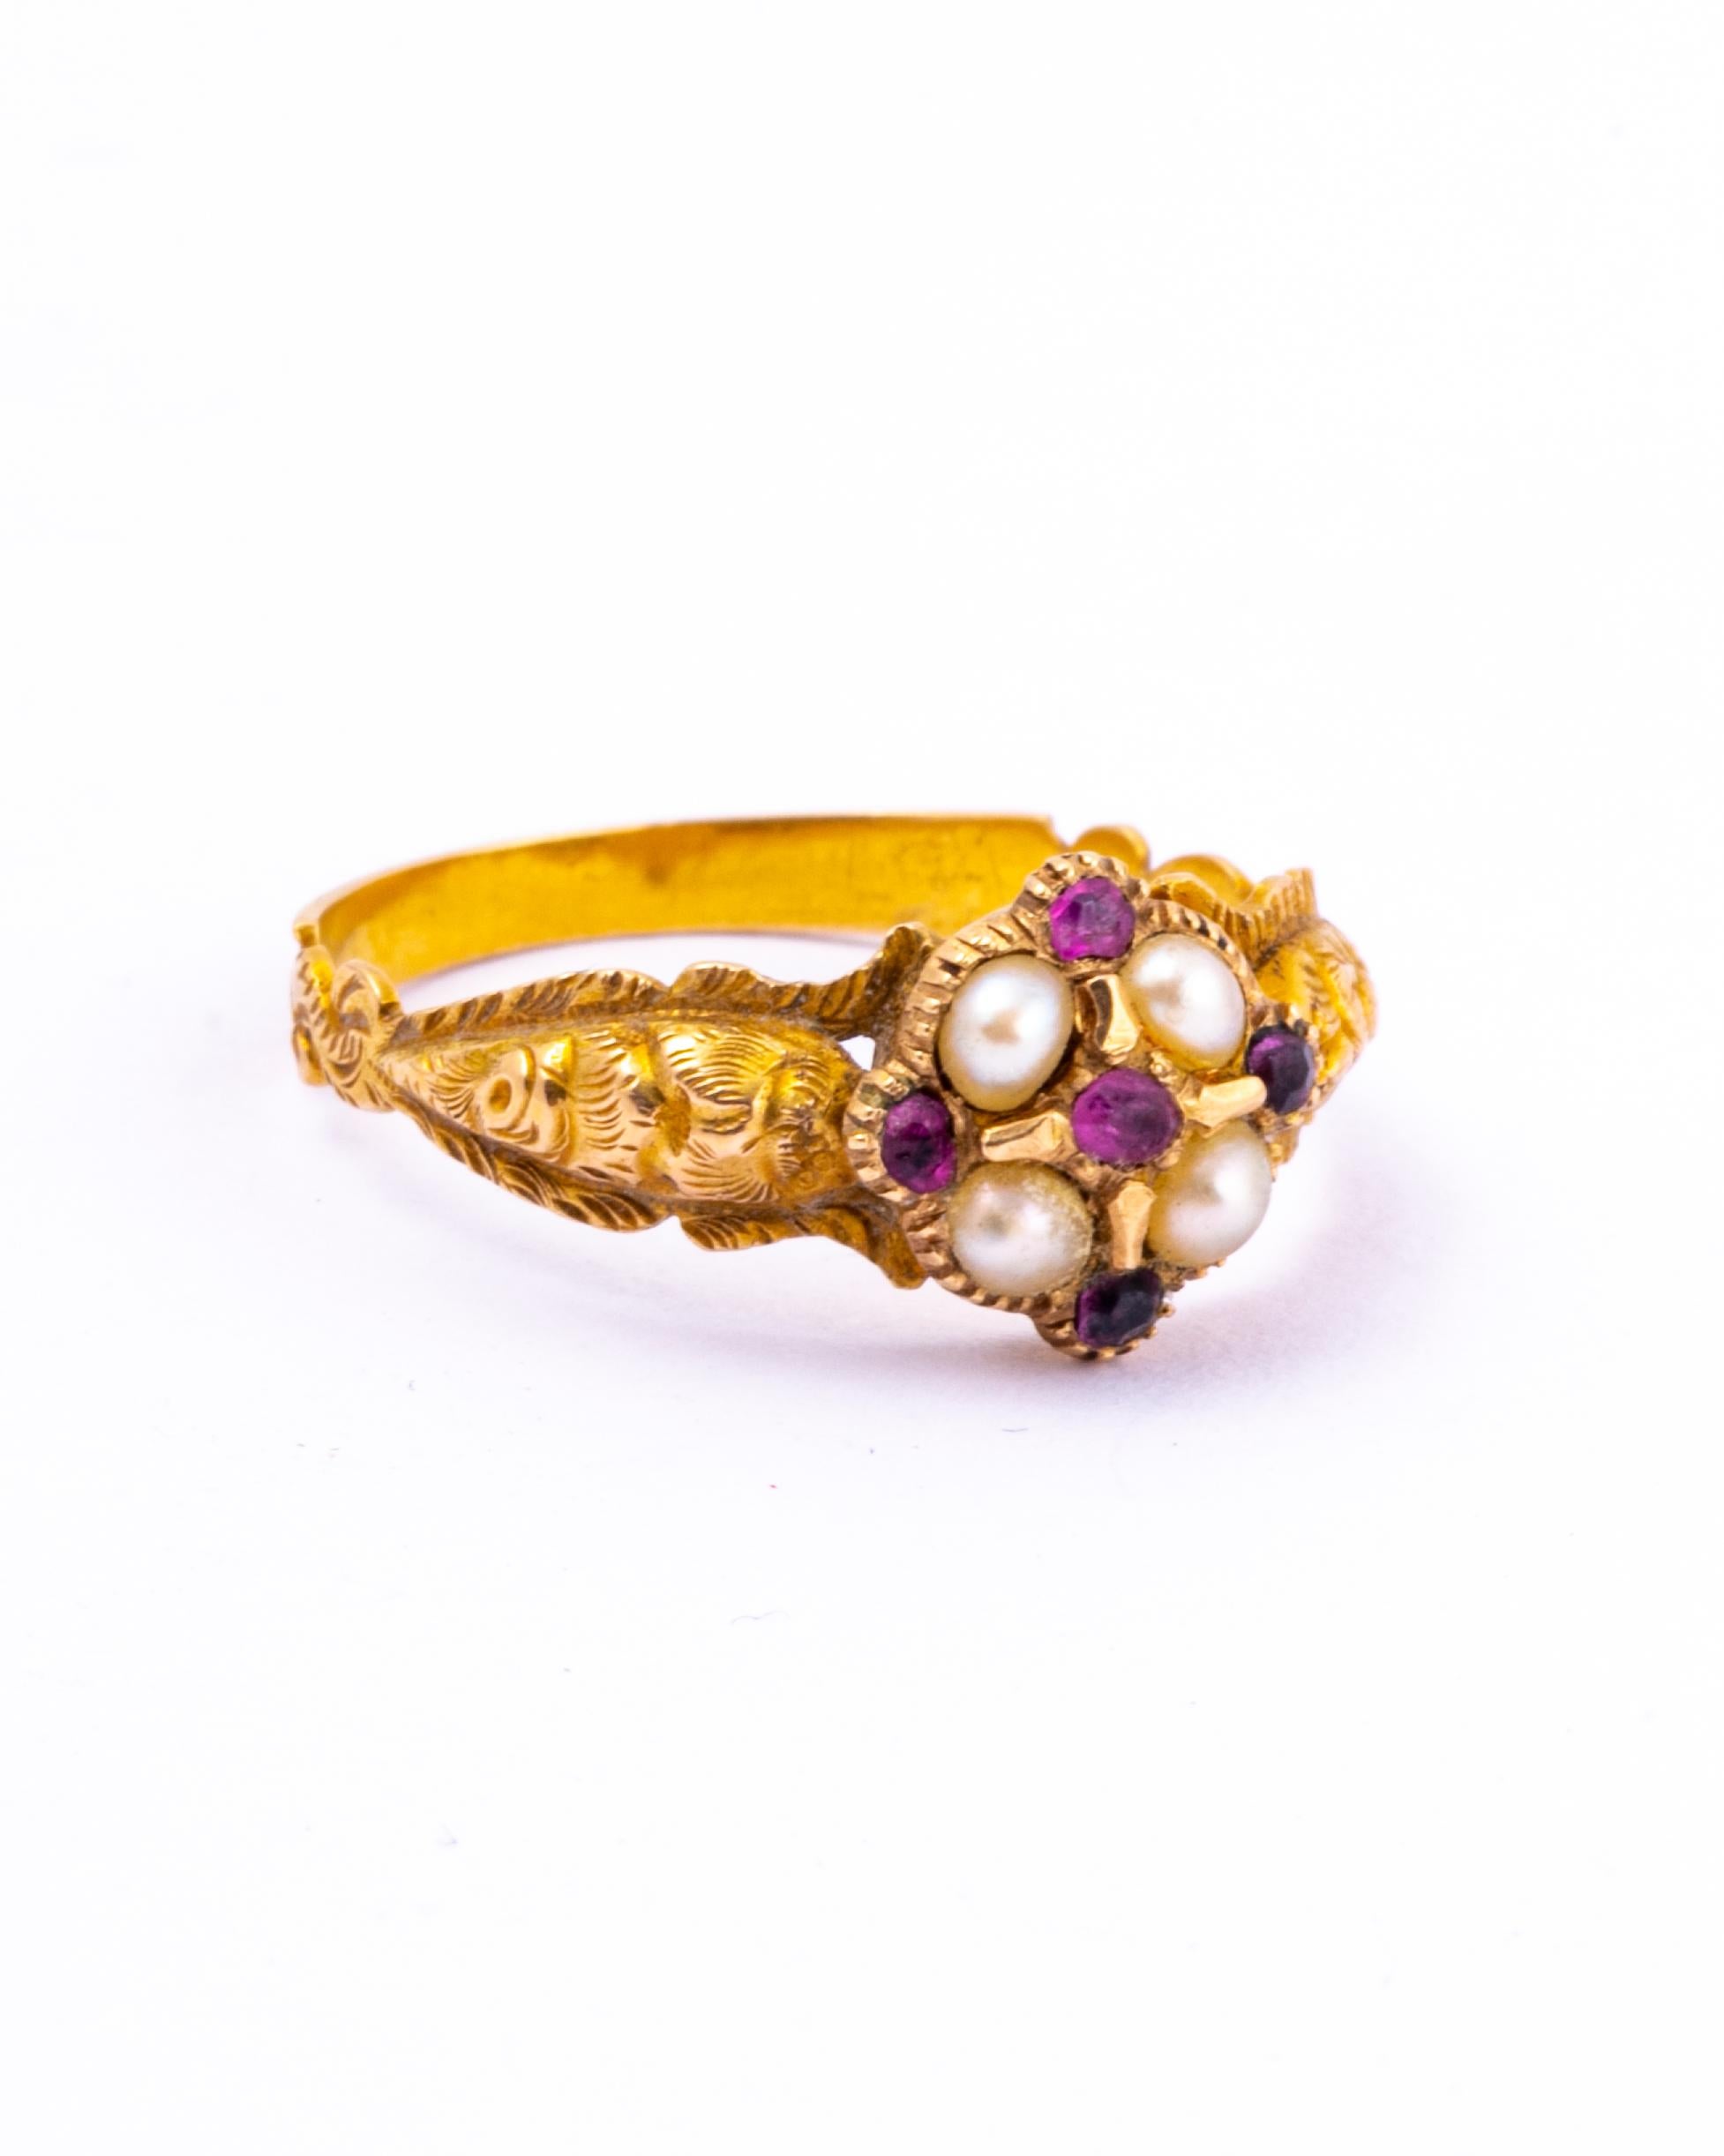 A spectacular antique Georgian ring. At the centre of four pearls is a small ruby with rubies in-between each pearl on the outside. The moulded shoulders have wonderful texture and engraved detail. Modelled in 18 carat yellow gold.

Ring Size: Q 1/2